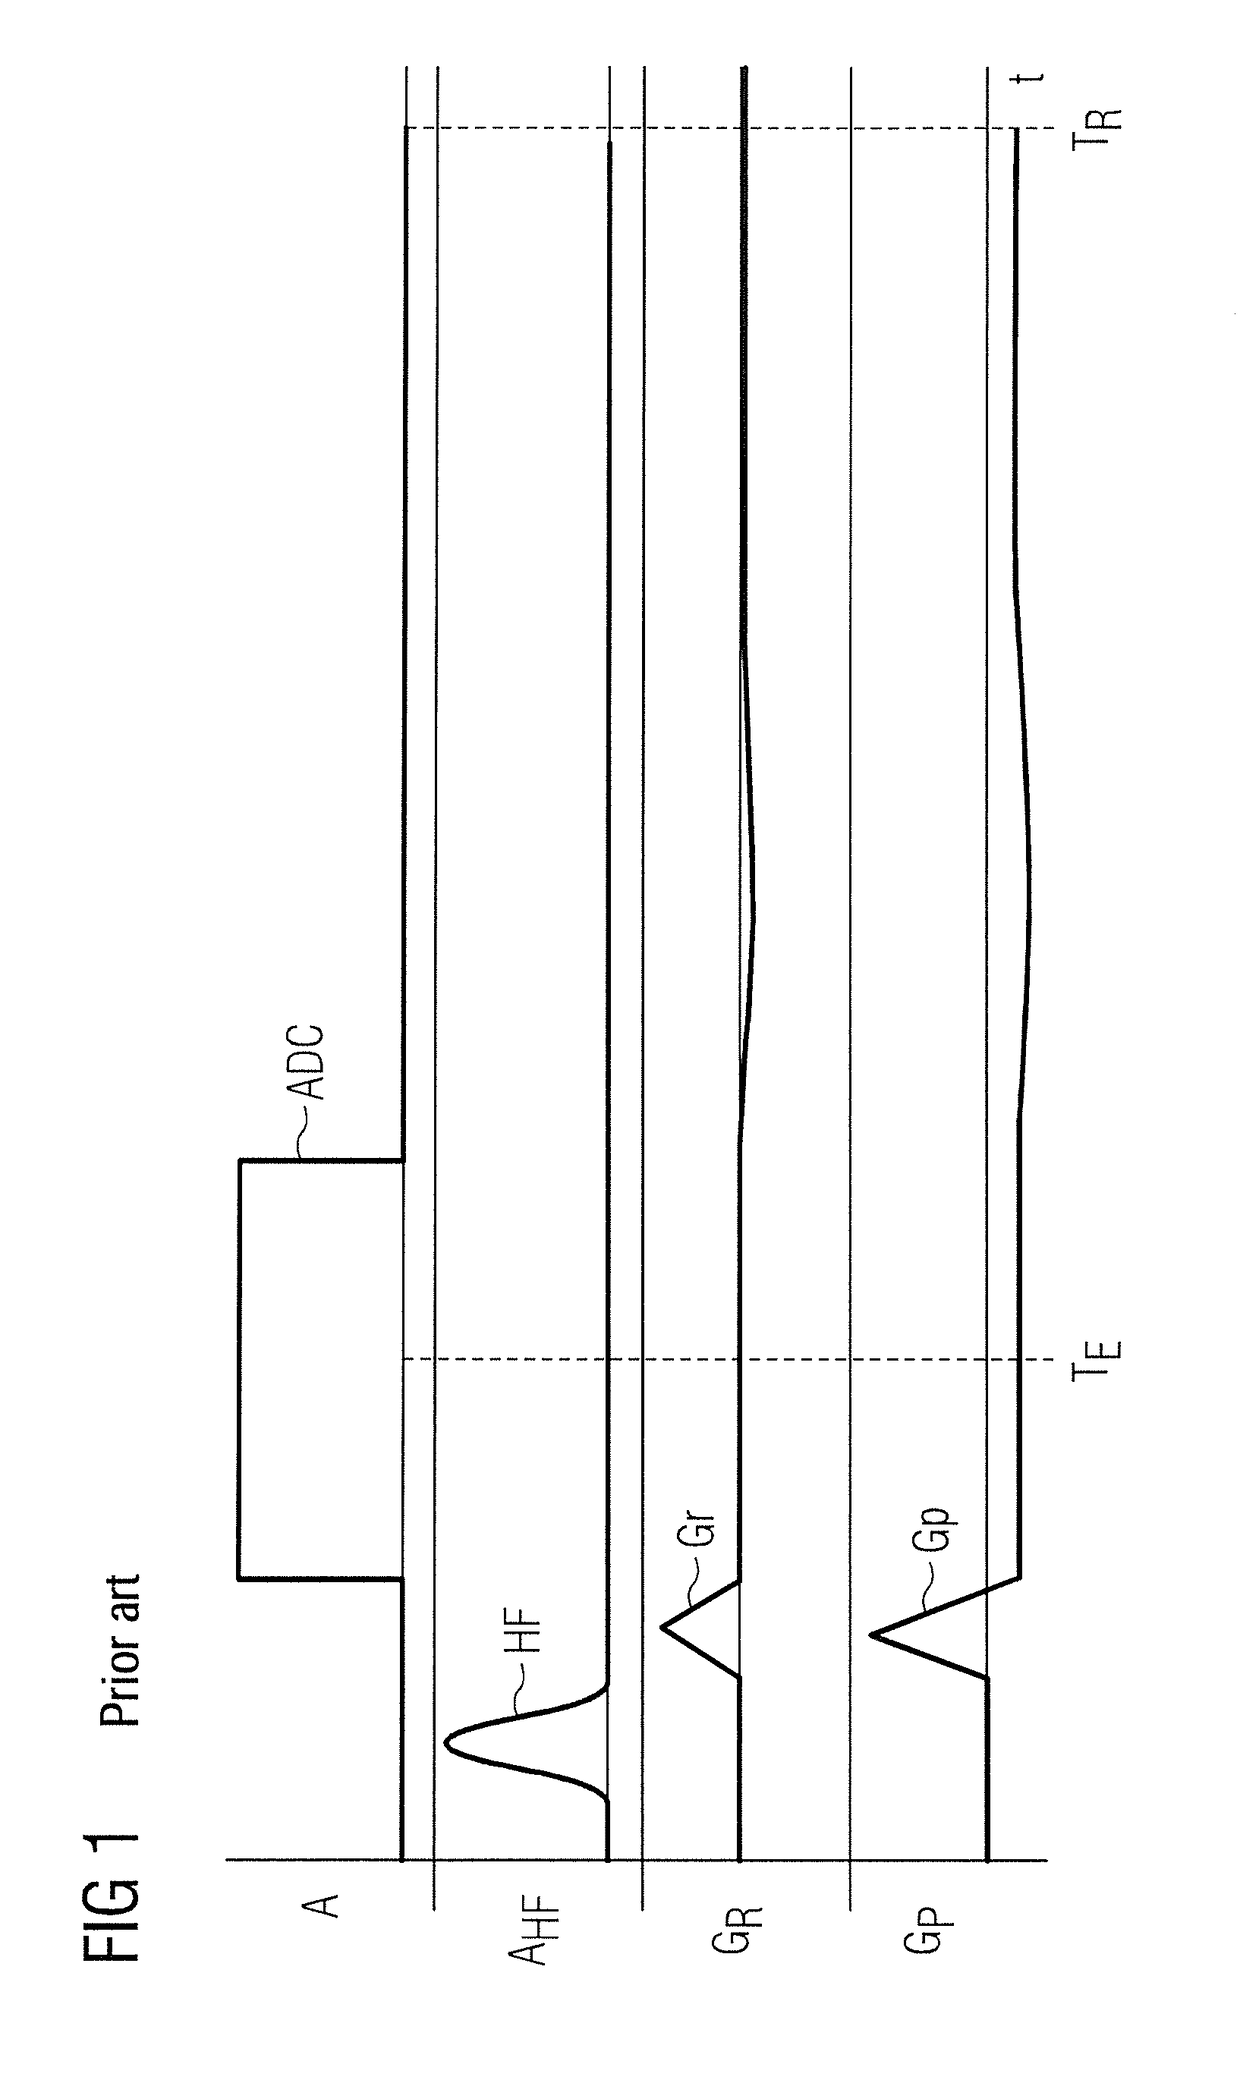 Method and apparatus for sectional optimization of radial mr pulse sequences